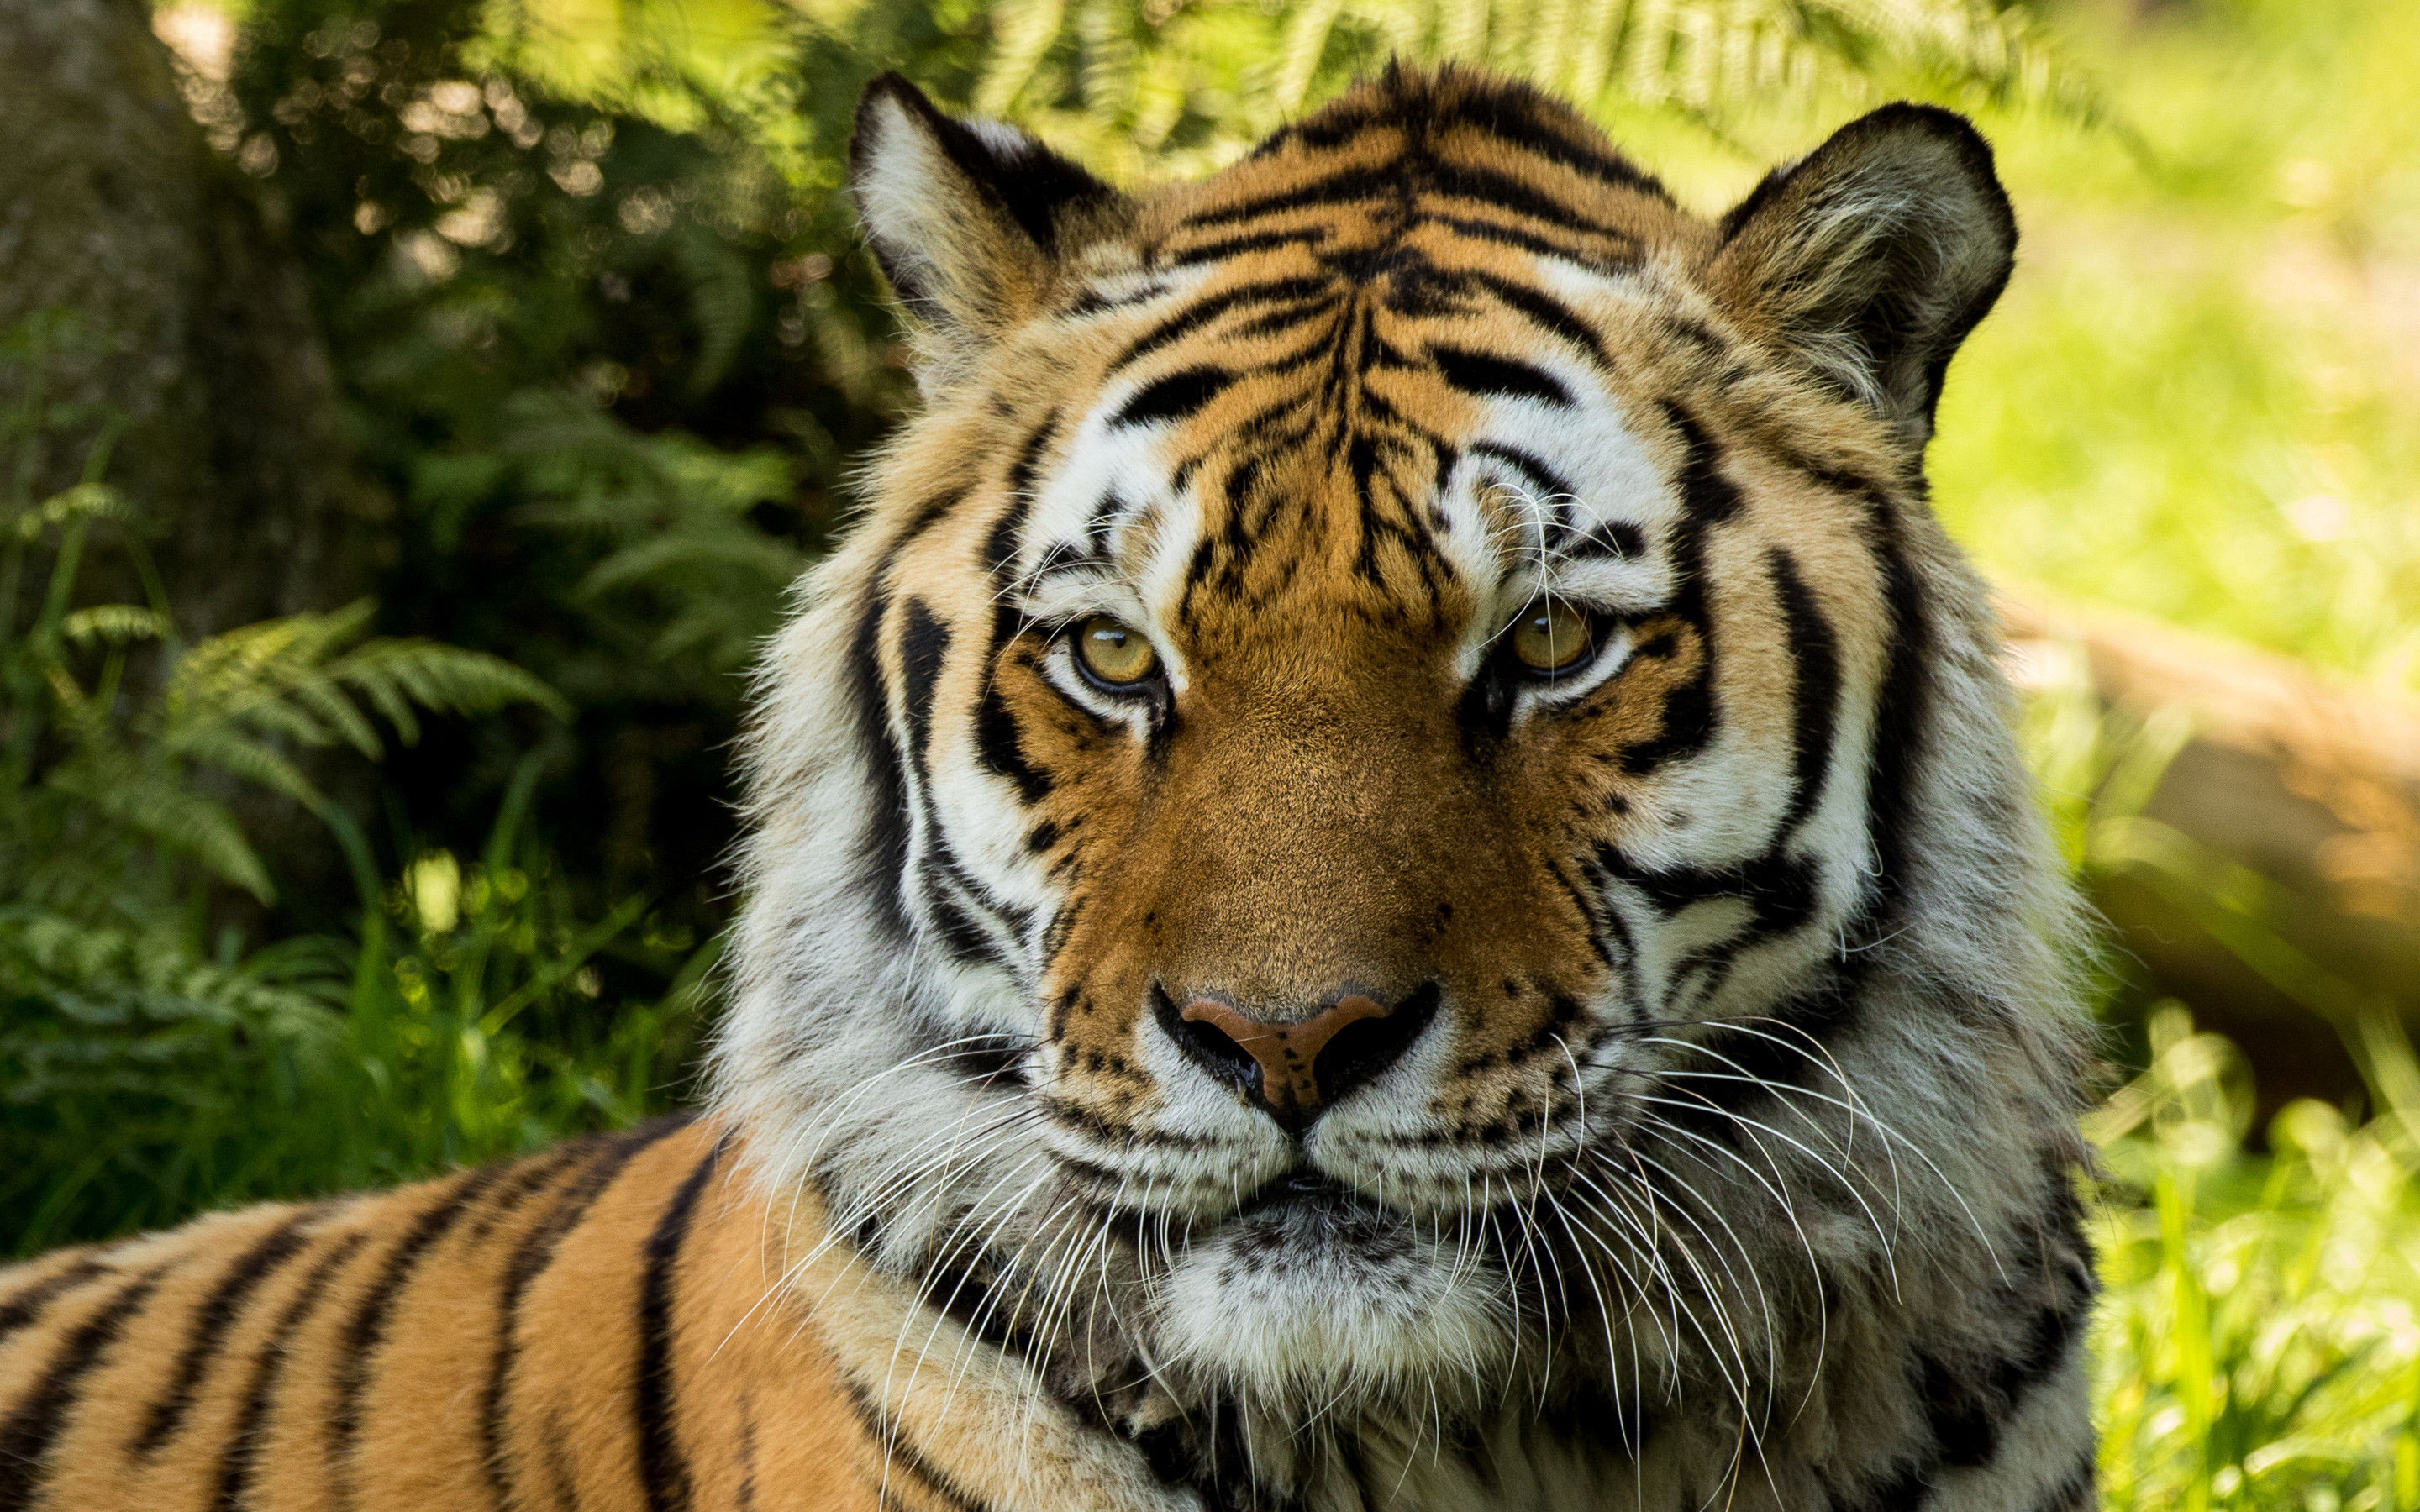 Full Hd 1080p Animals Wallpapers, Desktop Backgrounds - High Definition  Photographs Of Tigers - 2880x1800 Wallpaper 